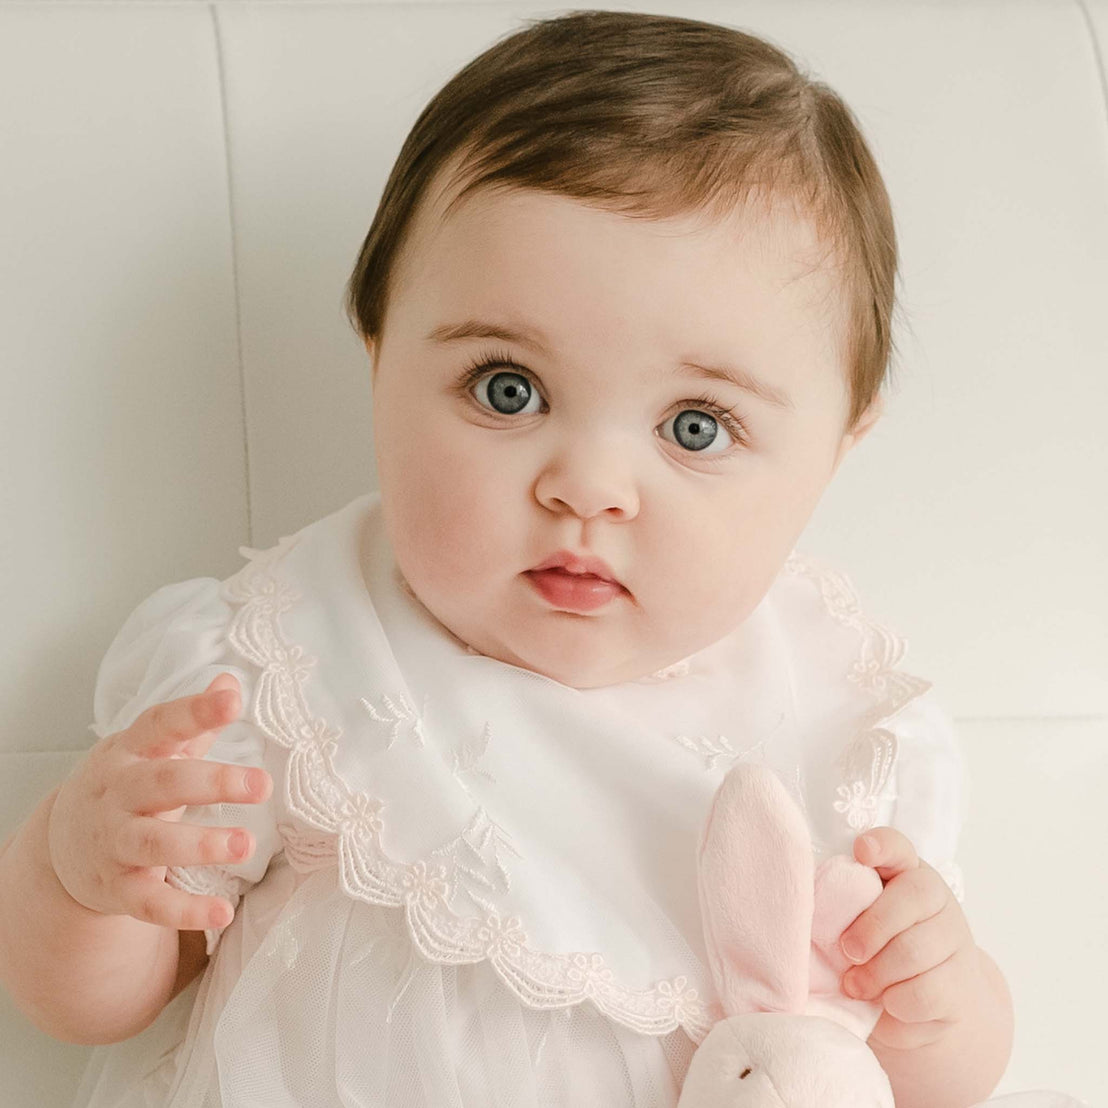 A baby with blue eyes and brown hair poses in a vintage-inspired white Joli Bib, holding a small pink bunny for her baptism. The child appears curious and attentive.